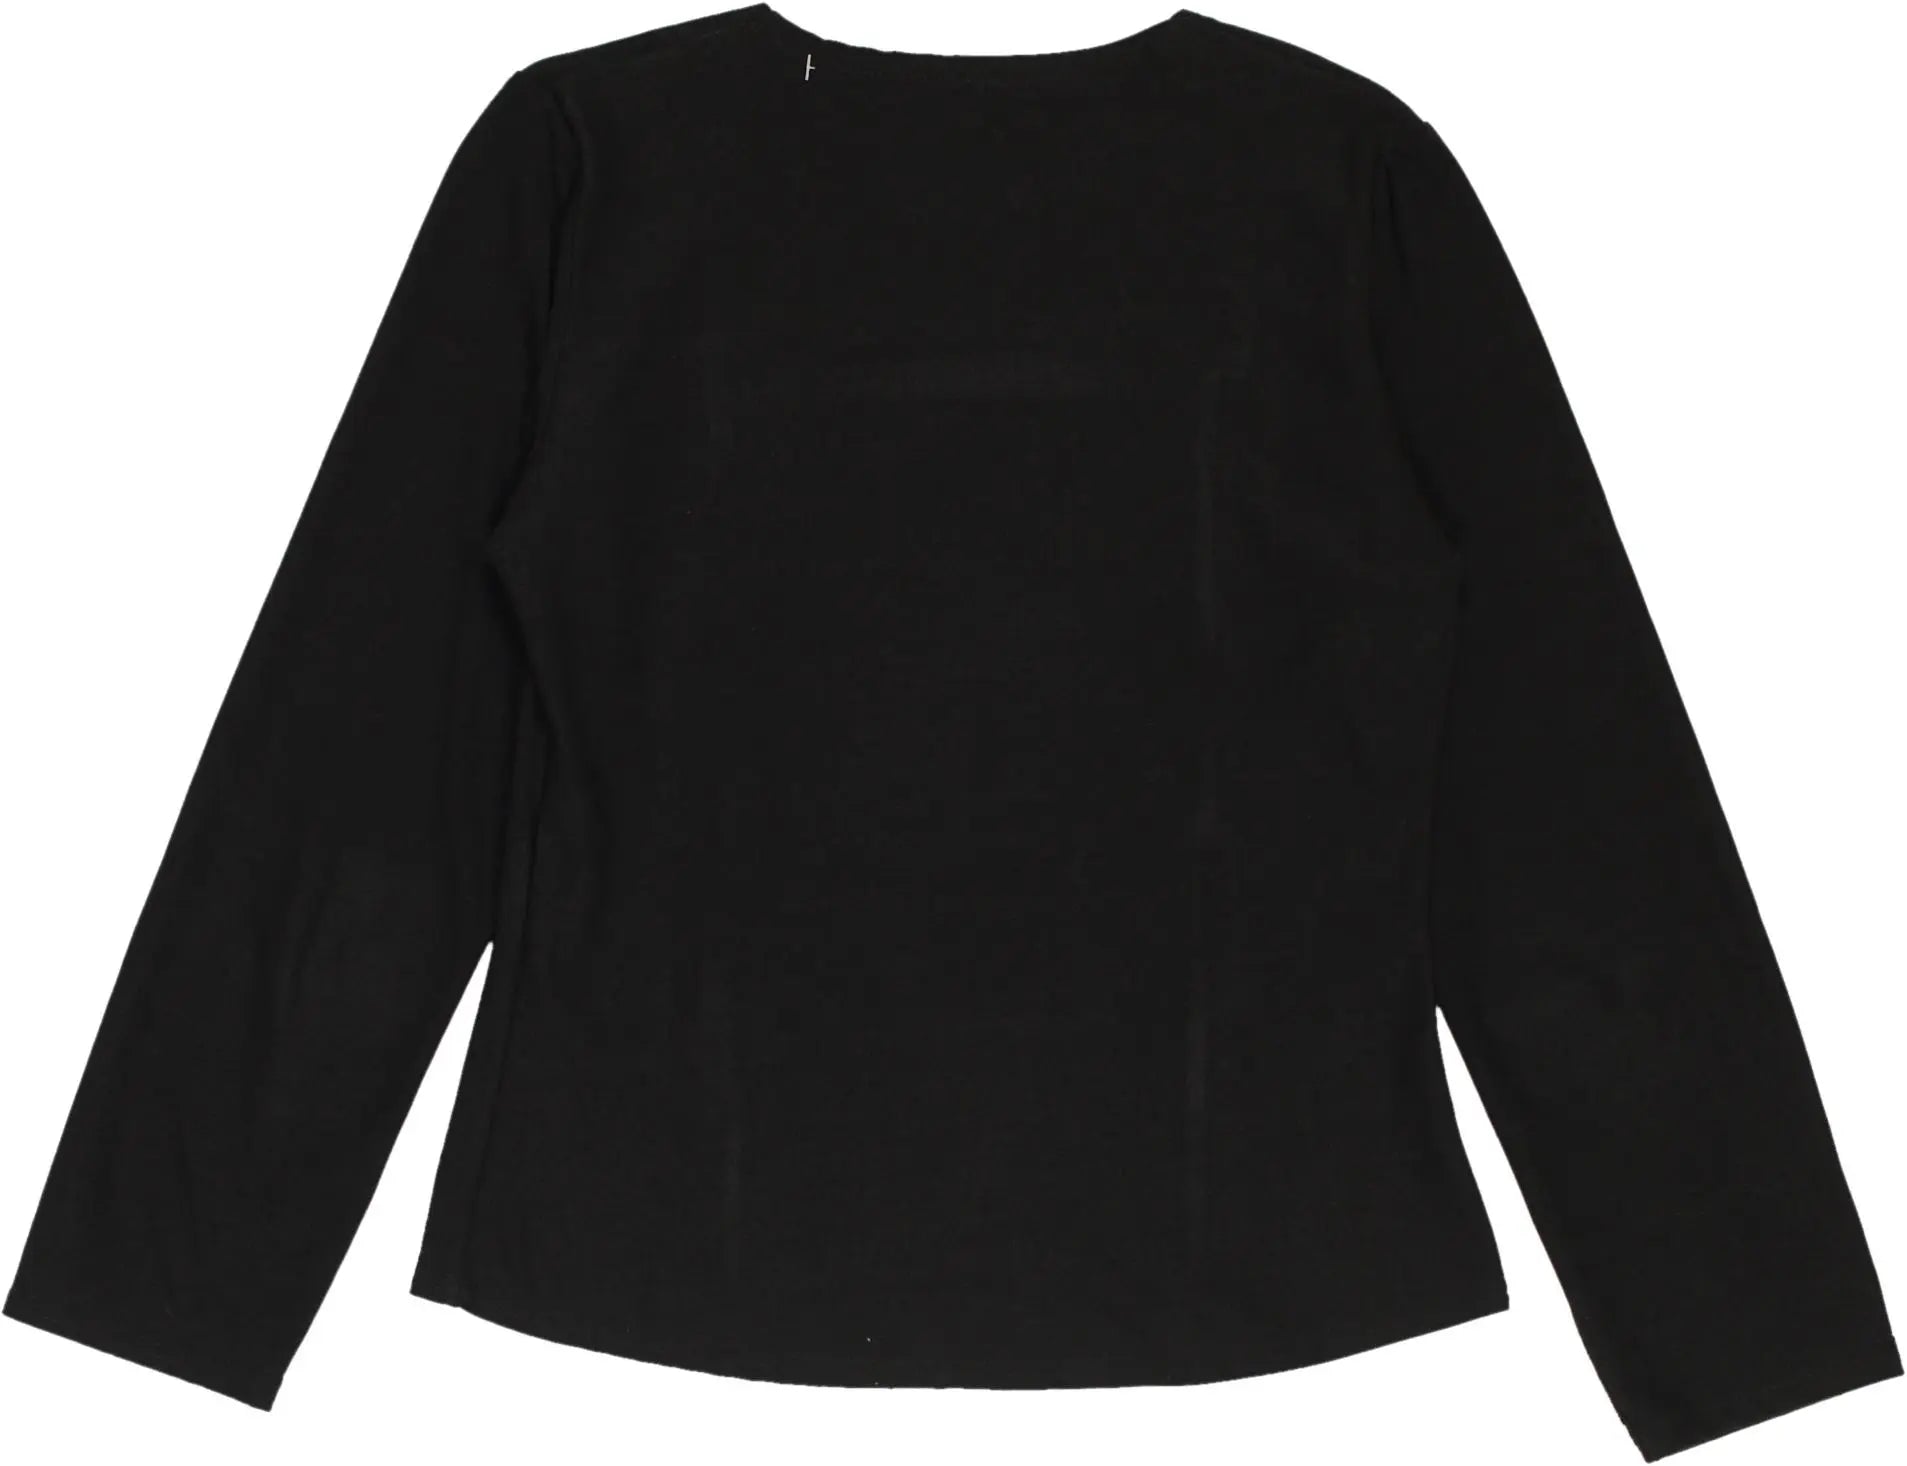 Unknown - Black long sleeve top- ThriftTale.com - Vintage and second handclothing